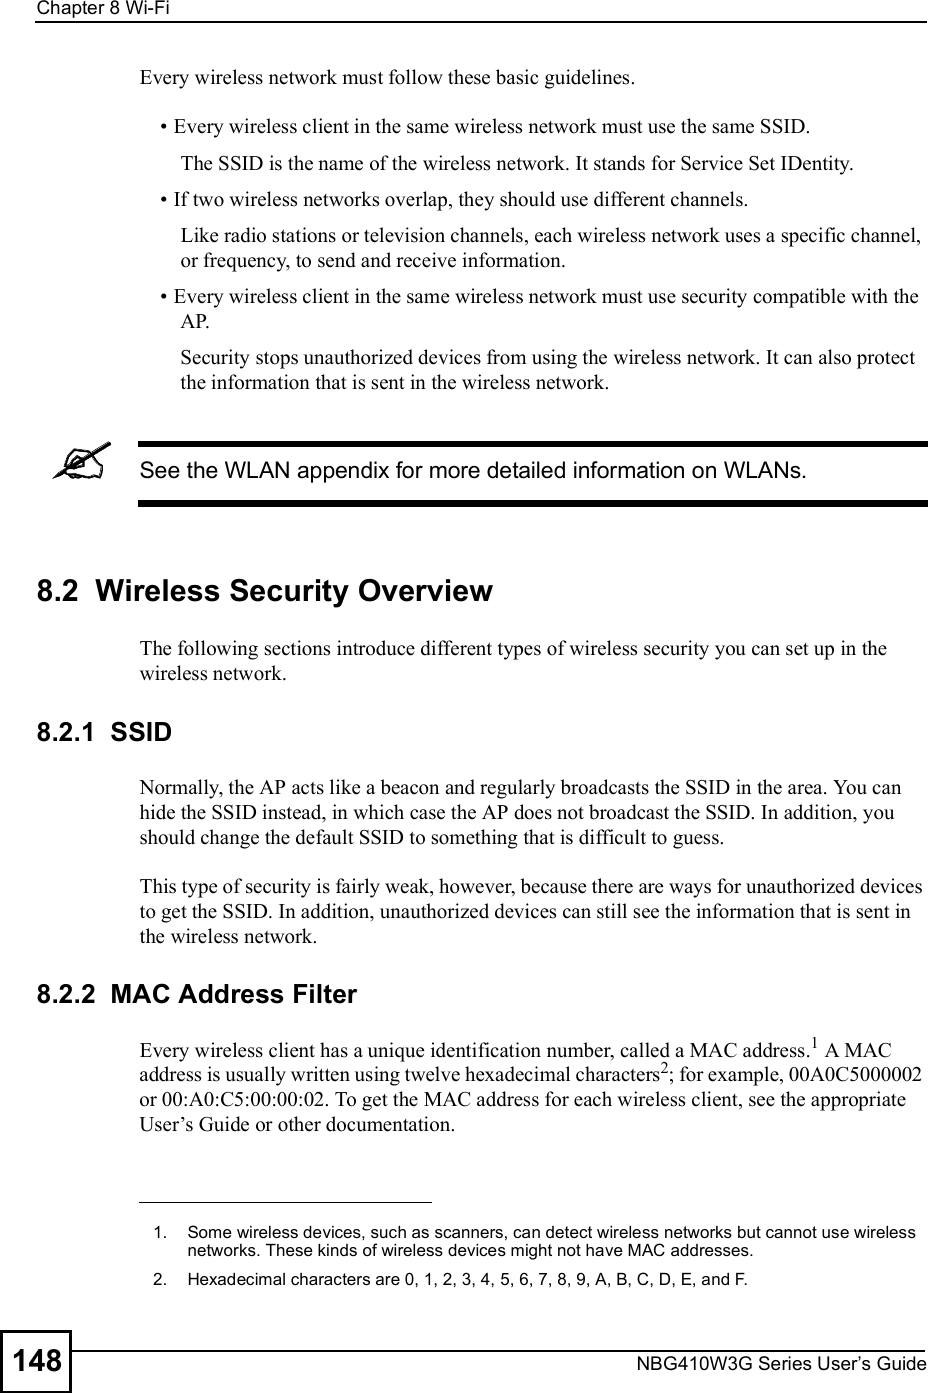 Chapter 8Wi-FiNBG410W3G Series User s Guide148Every wireless network must follow these basic guidelines. Every wireless client in the same wireless network must use the same SSID.The SSID is the name of the wireless network. It stands for Service Set IDentity. If two wireless networks overlap, they should use different channels.Like radio stations or television channels, each wireless network uses a specific channel, or frequency, to send and receive information. Every wireless client in the same wireless network must use security compatible with the AP.Security stops unauthorized devices from using the wireless network. It can also protect the information that is sent in the wireless network.See the WLAN appendix for more detailed information on WLANs.8.2  Wireless Security OverviewThe following sections introduce different types of wireless security you can set up in the wireless network.8.2.1  SSIDNormally, the AP acts like a beacon and regularly broadcasts the SSID in the area. You can hide the SSID instead, in which case the AP does not broadcast the SSID. In addition, you should change the default SSID to something that is difficult to guess.This type of security is fairly weak, however, because there are ways for unauthorized devices to get the SSID. In addition, unauthorized devices can still see the information that is sent in the wireless network.8.2.2  MAC Address FilterEvery wireless client has a unique identification number, called a MAC address.1 A MAC address is usually written using twelve hexadecimal characters2; for example, 00A0C5000002 or 00:A0:C5:00:00:02. To get the MAC address for each wireless client, see the appropriate User!s Guide or other documentation.1.Some wireless devices, such as scanners, can detect wireless networks but cannot use wireless networks. These kinds of wireless devices might not have MAC addresses.2.Hexadecimal characters are 0, 1, 2, 3, 4, 5, 6, 7, 8, 9, A, B, C, D, E, and F.